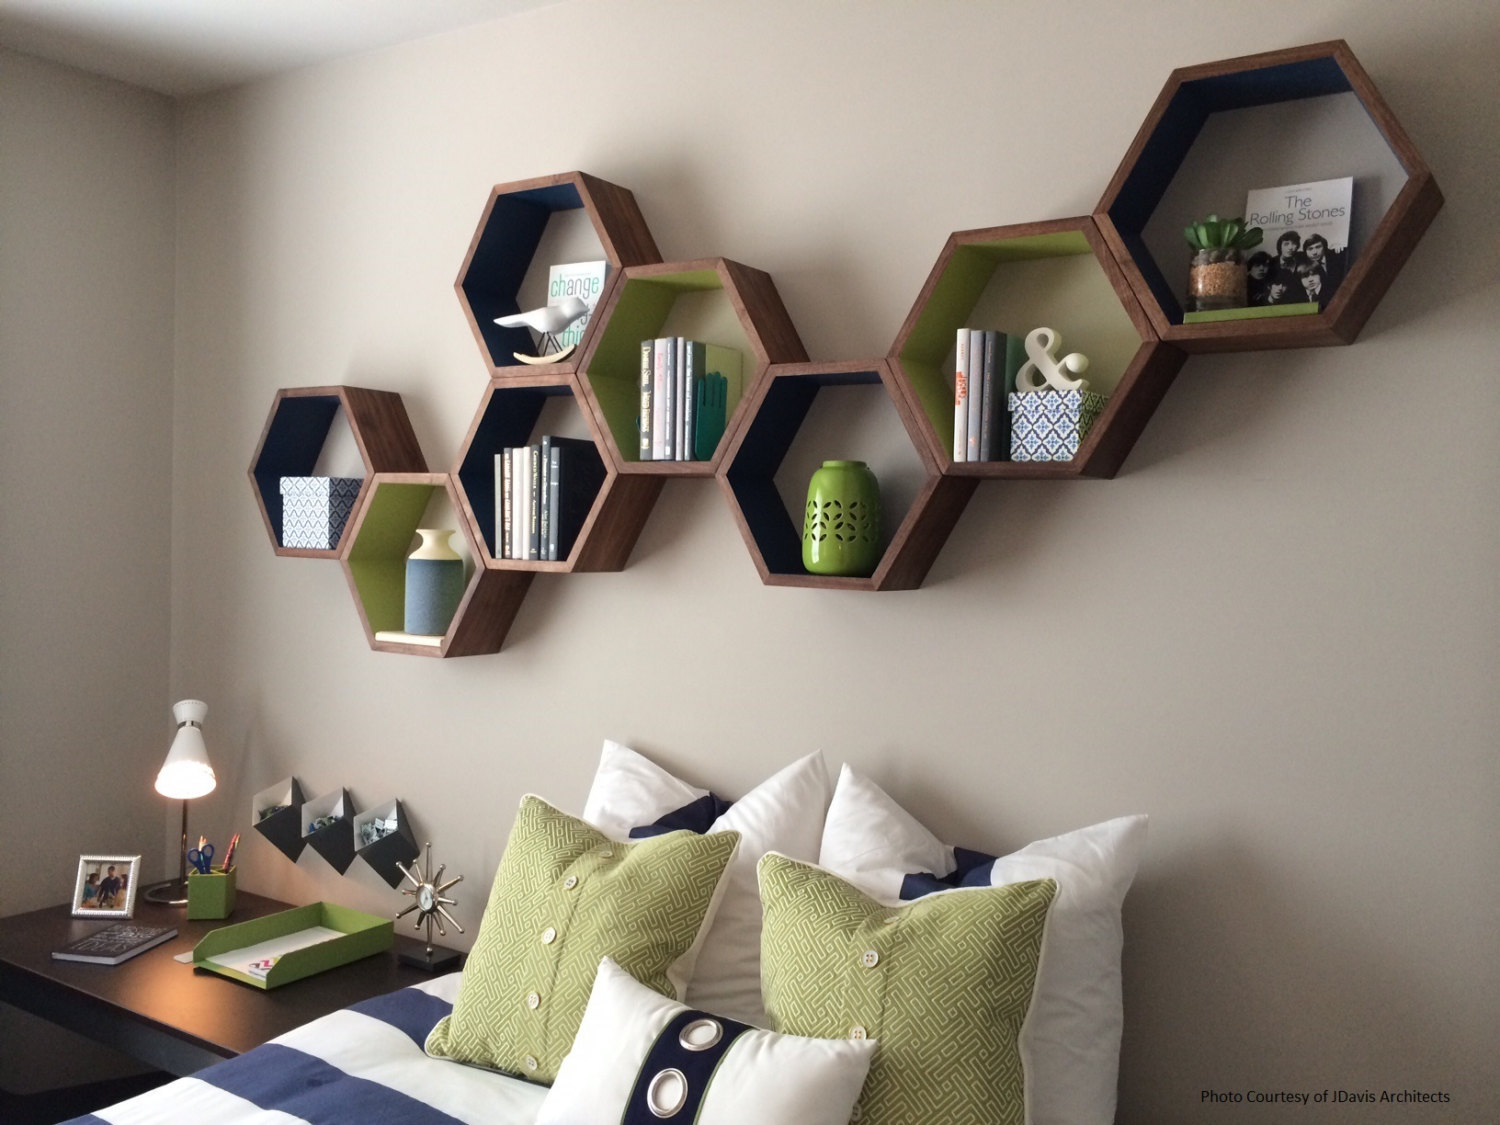 20 Creative Ways To Decorate Your Home With Unexpected